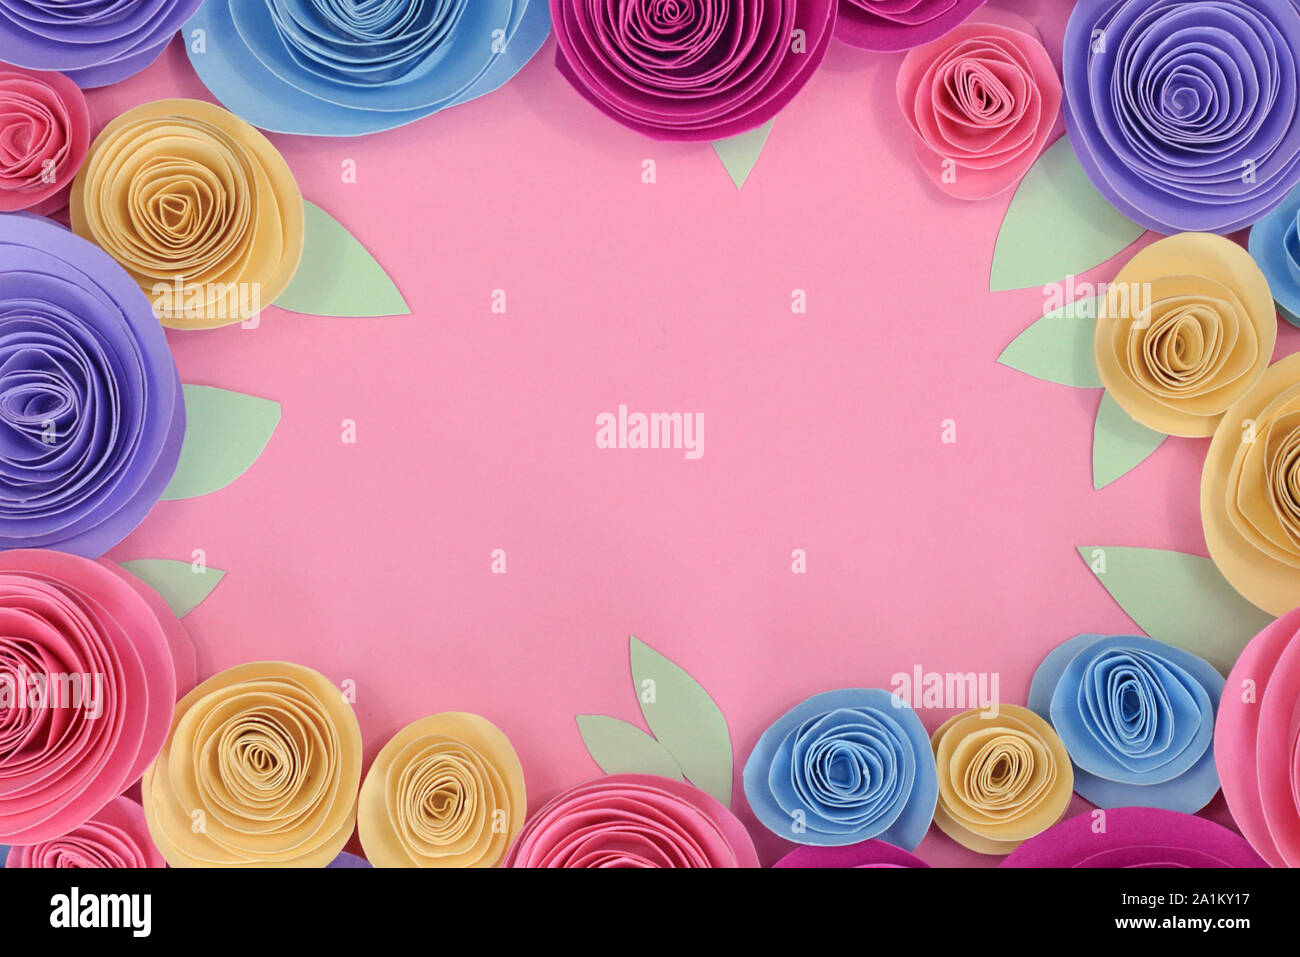 Pastel colored paper craft rose flat lay background with flowers